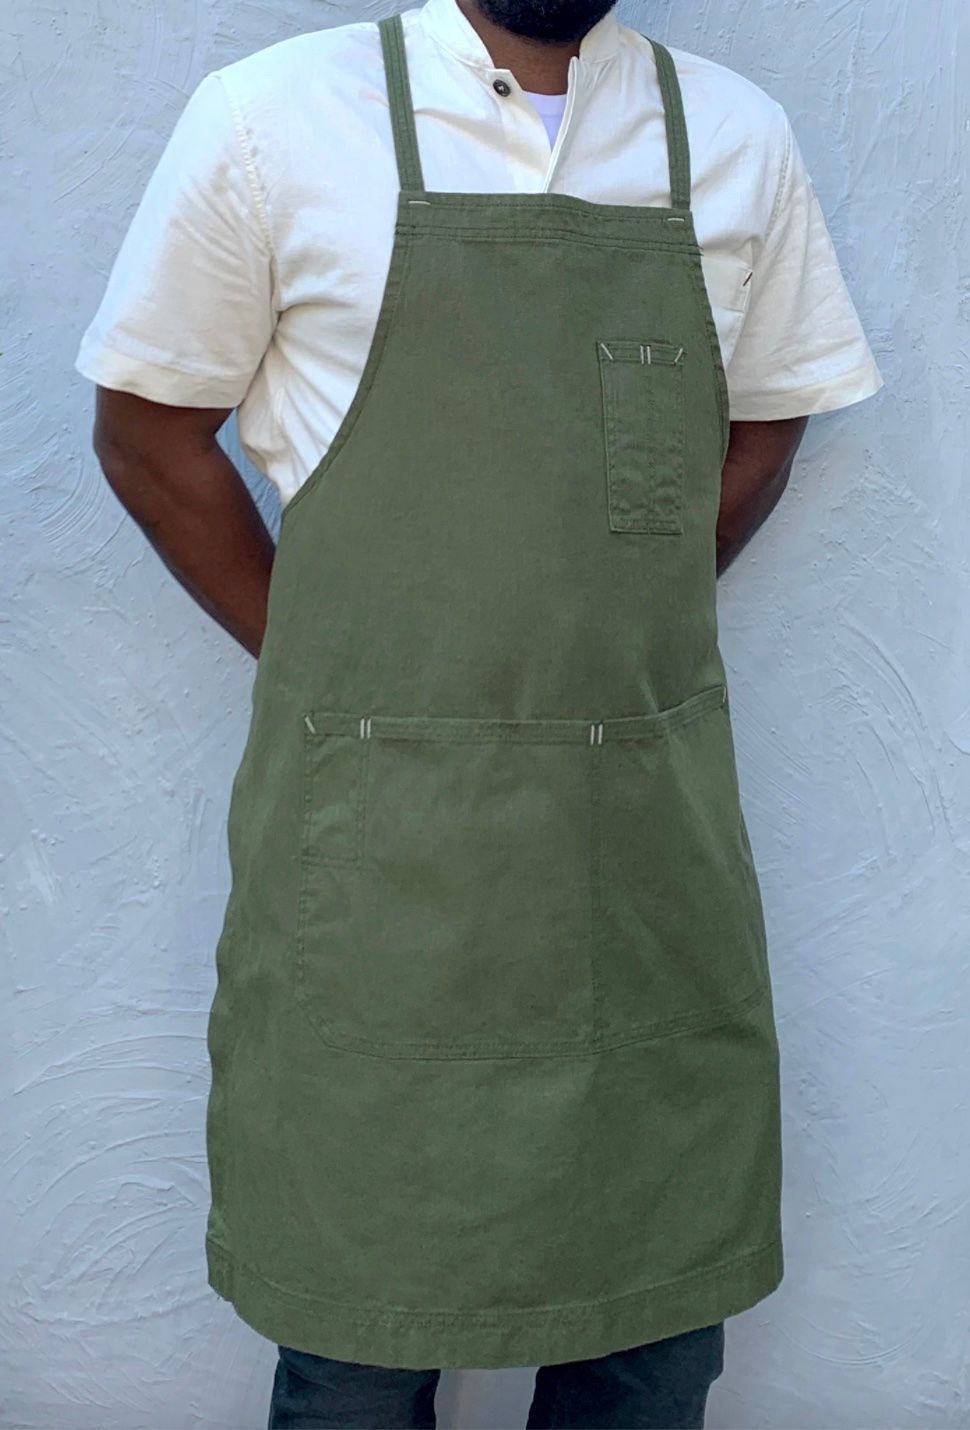 Men Women's Classic Apron with H Shoulder Strap Coffee Store Restaurant Workwear